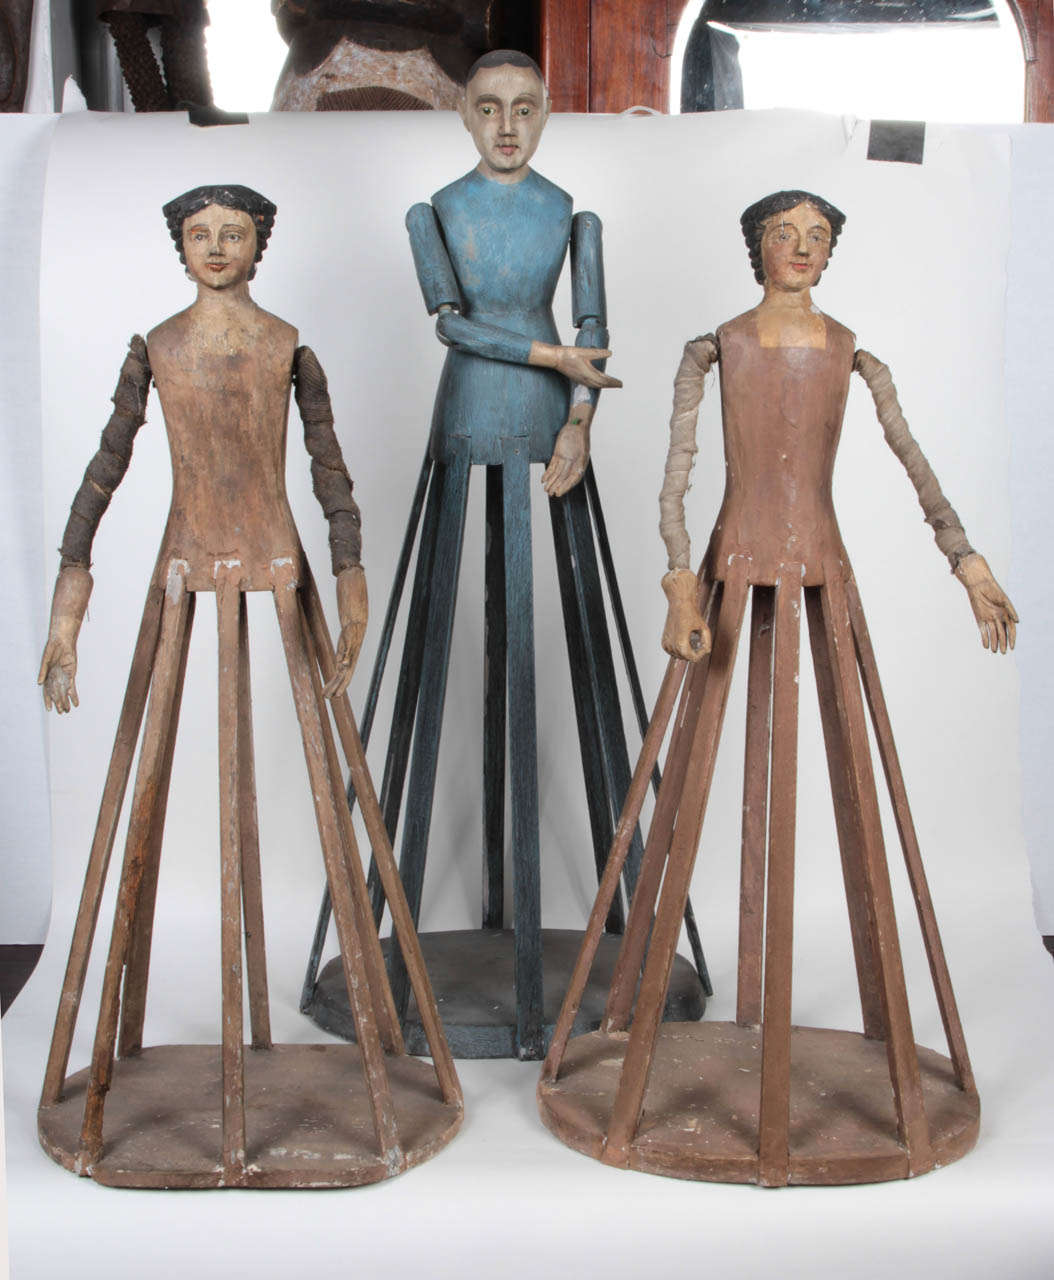 Antique Bastidor cage doll mannequin.  Spanish influence, Phillipines, early 20th Century.  Please note that only one mannequin is available; the blue one in the center.